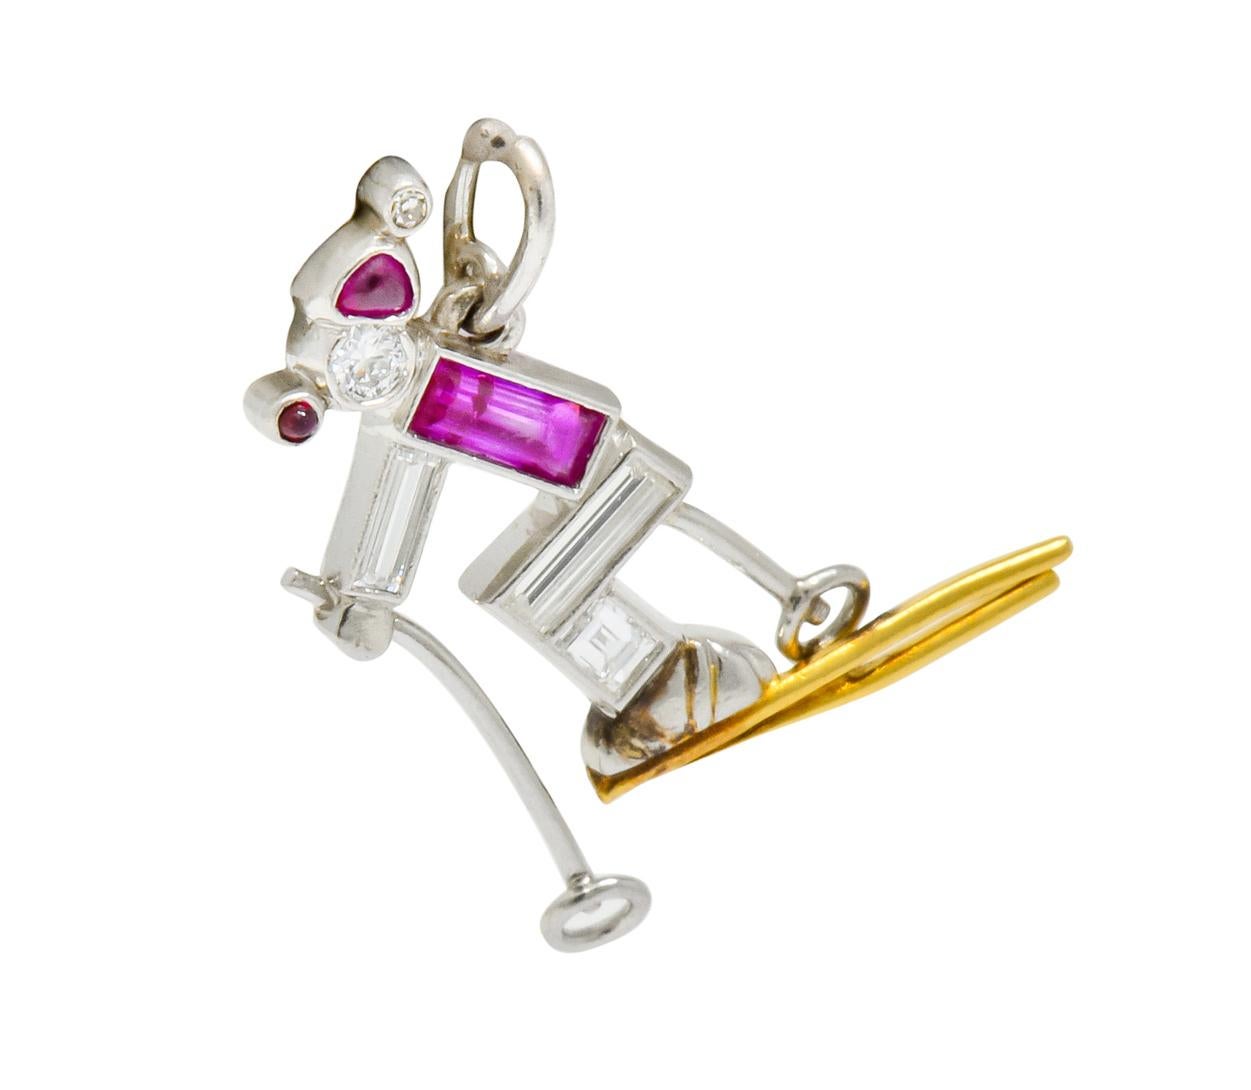 Designed as a crouched cross country skier grasping two poles while gliding on two polished gold skis

Stylized geometric body is comprised of baguette cut diamonds and ruby while head is a round brilliant cut diamond

Completed by a small whimsical